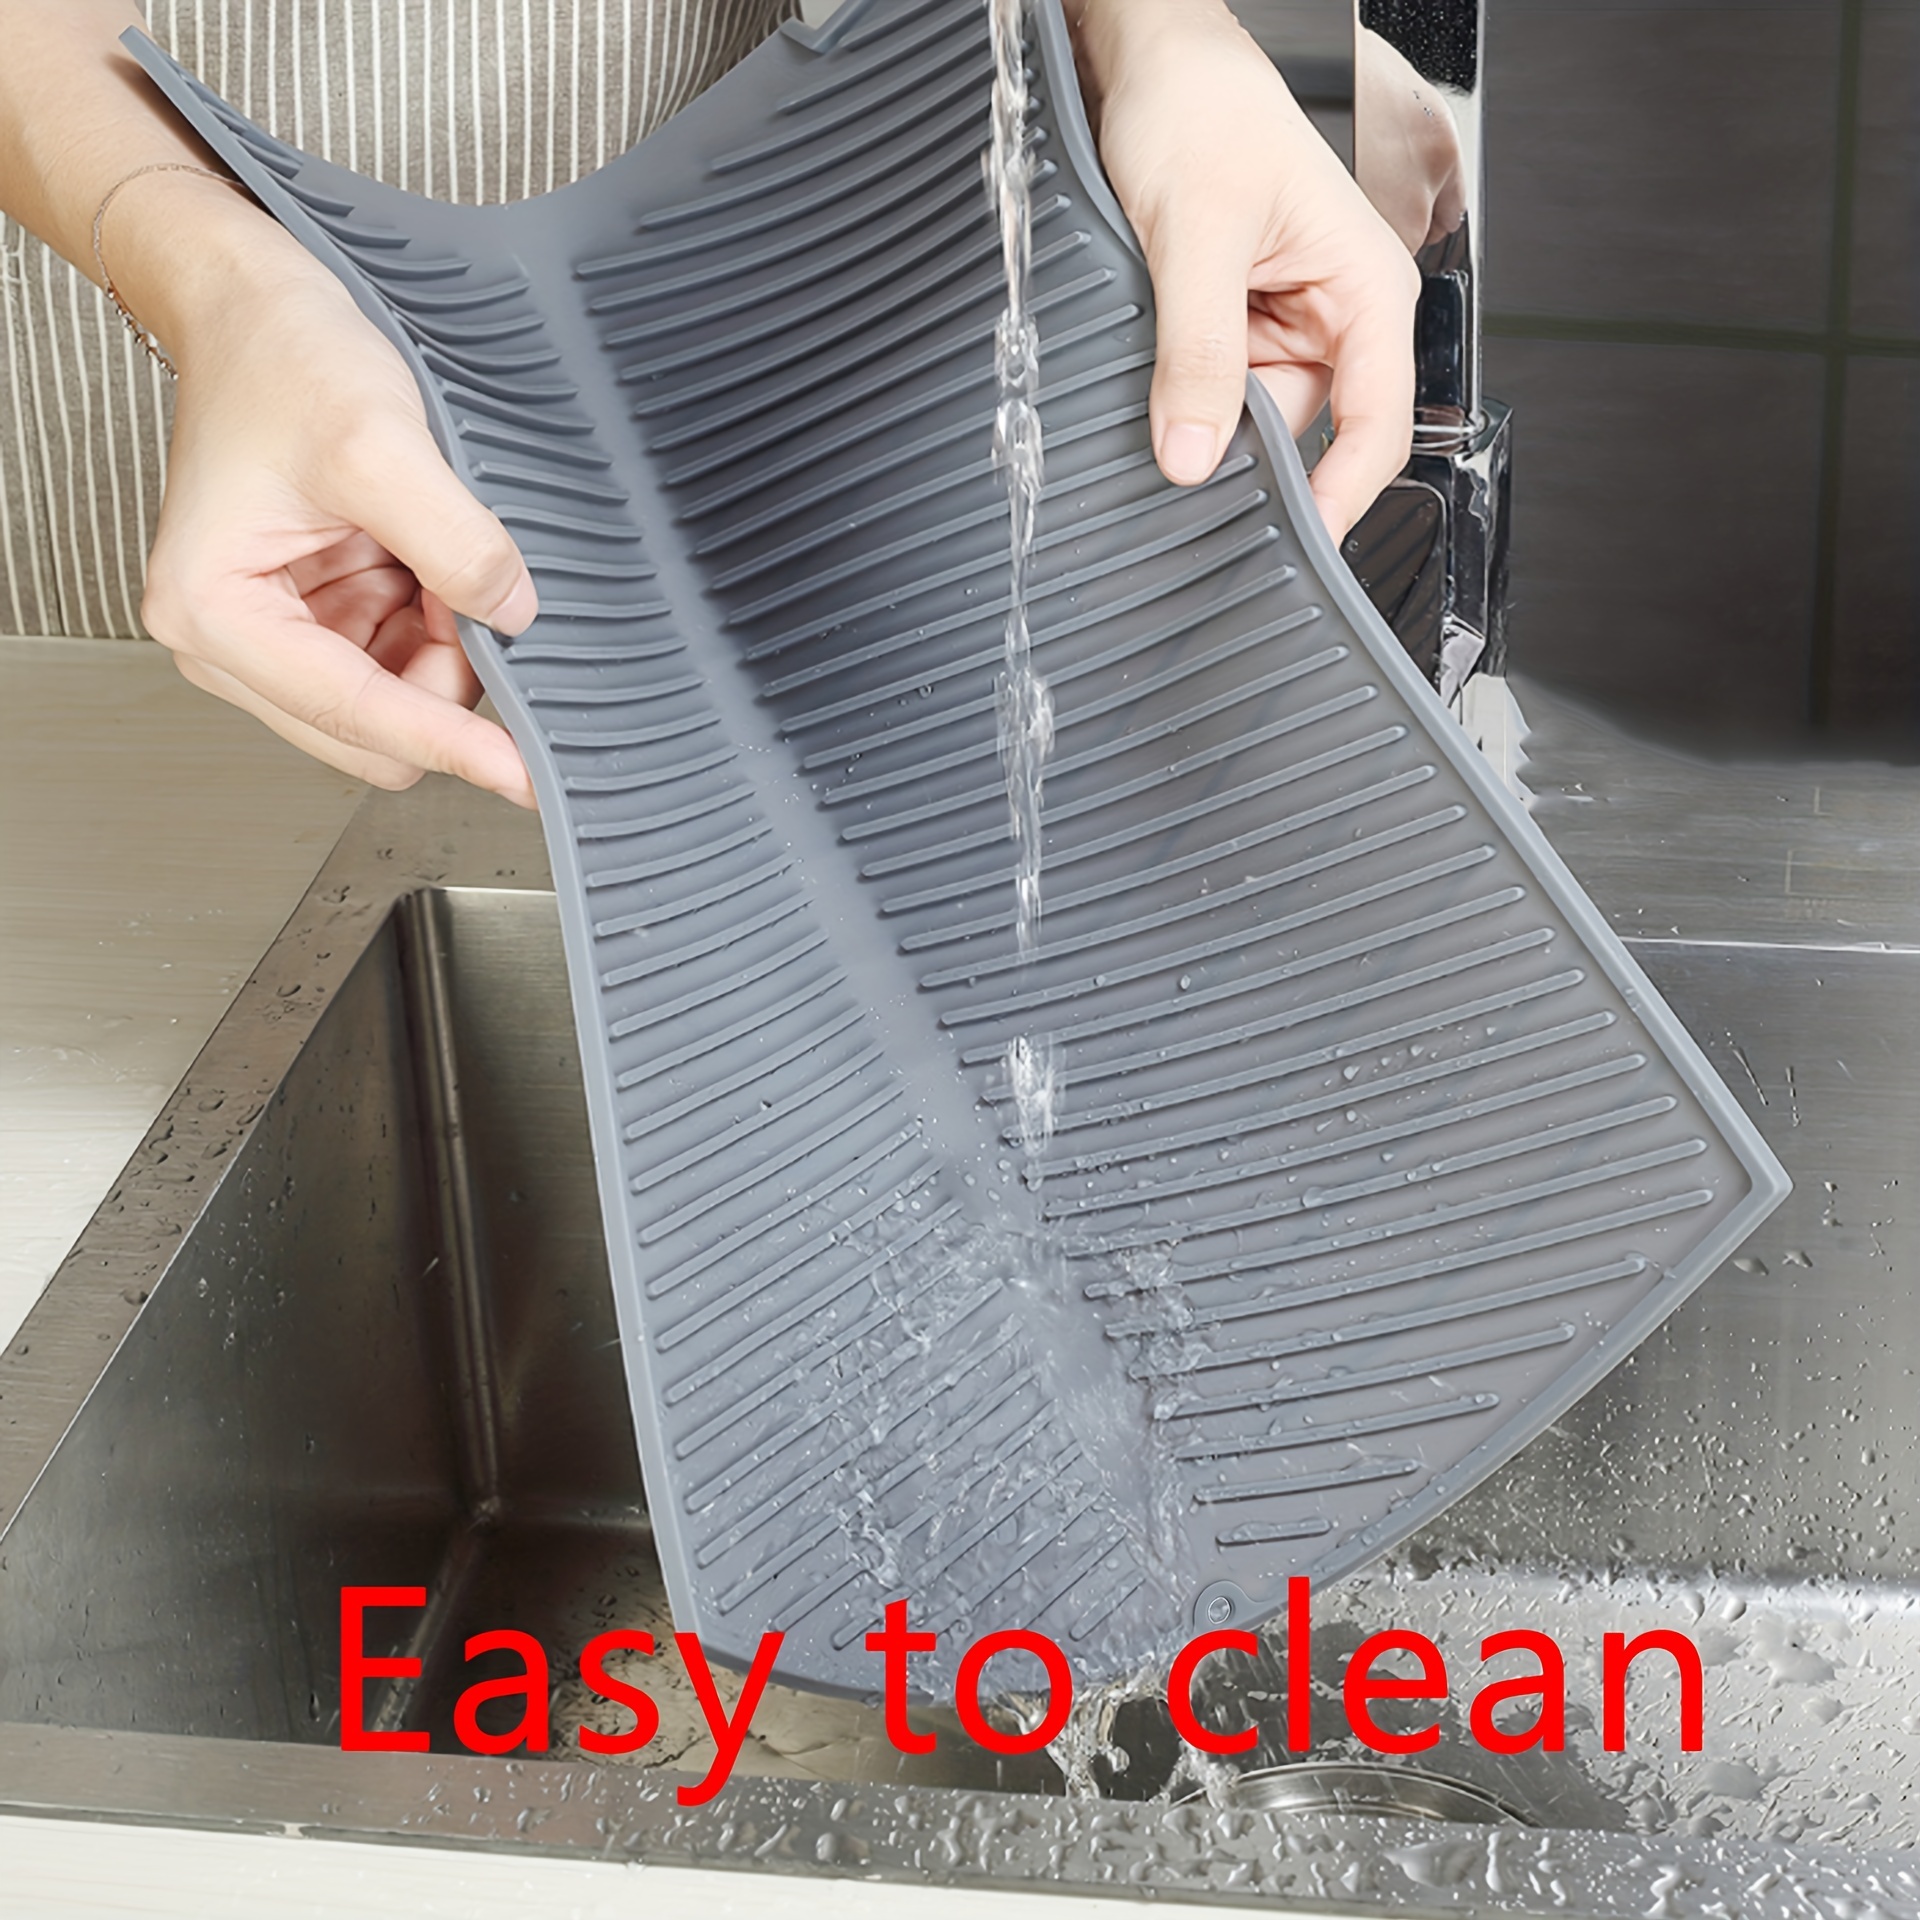 Silicone Dish Drying Mat - Drain Hole, Non-Slip, Heat Resistant, Foldable.  Great